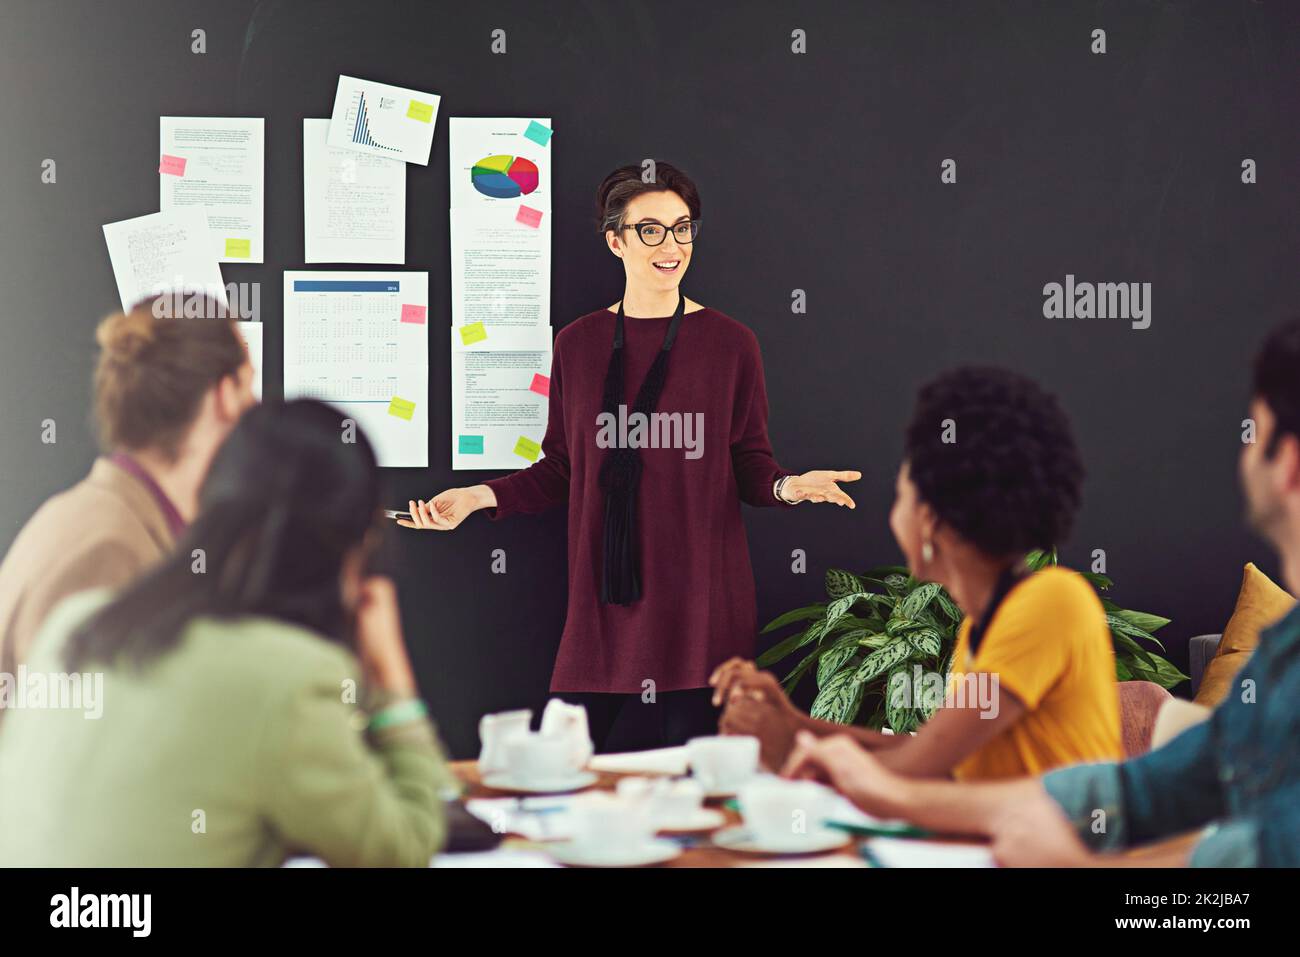 Impressing the team with her ideas. Cropped shot of a young creative giving a presentation to her colleagues in an office. Stock Photo